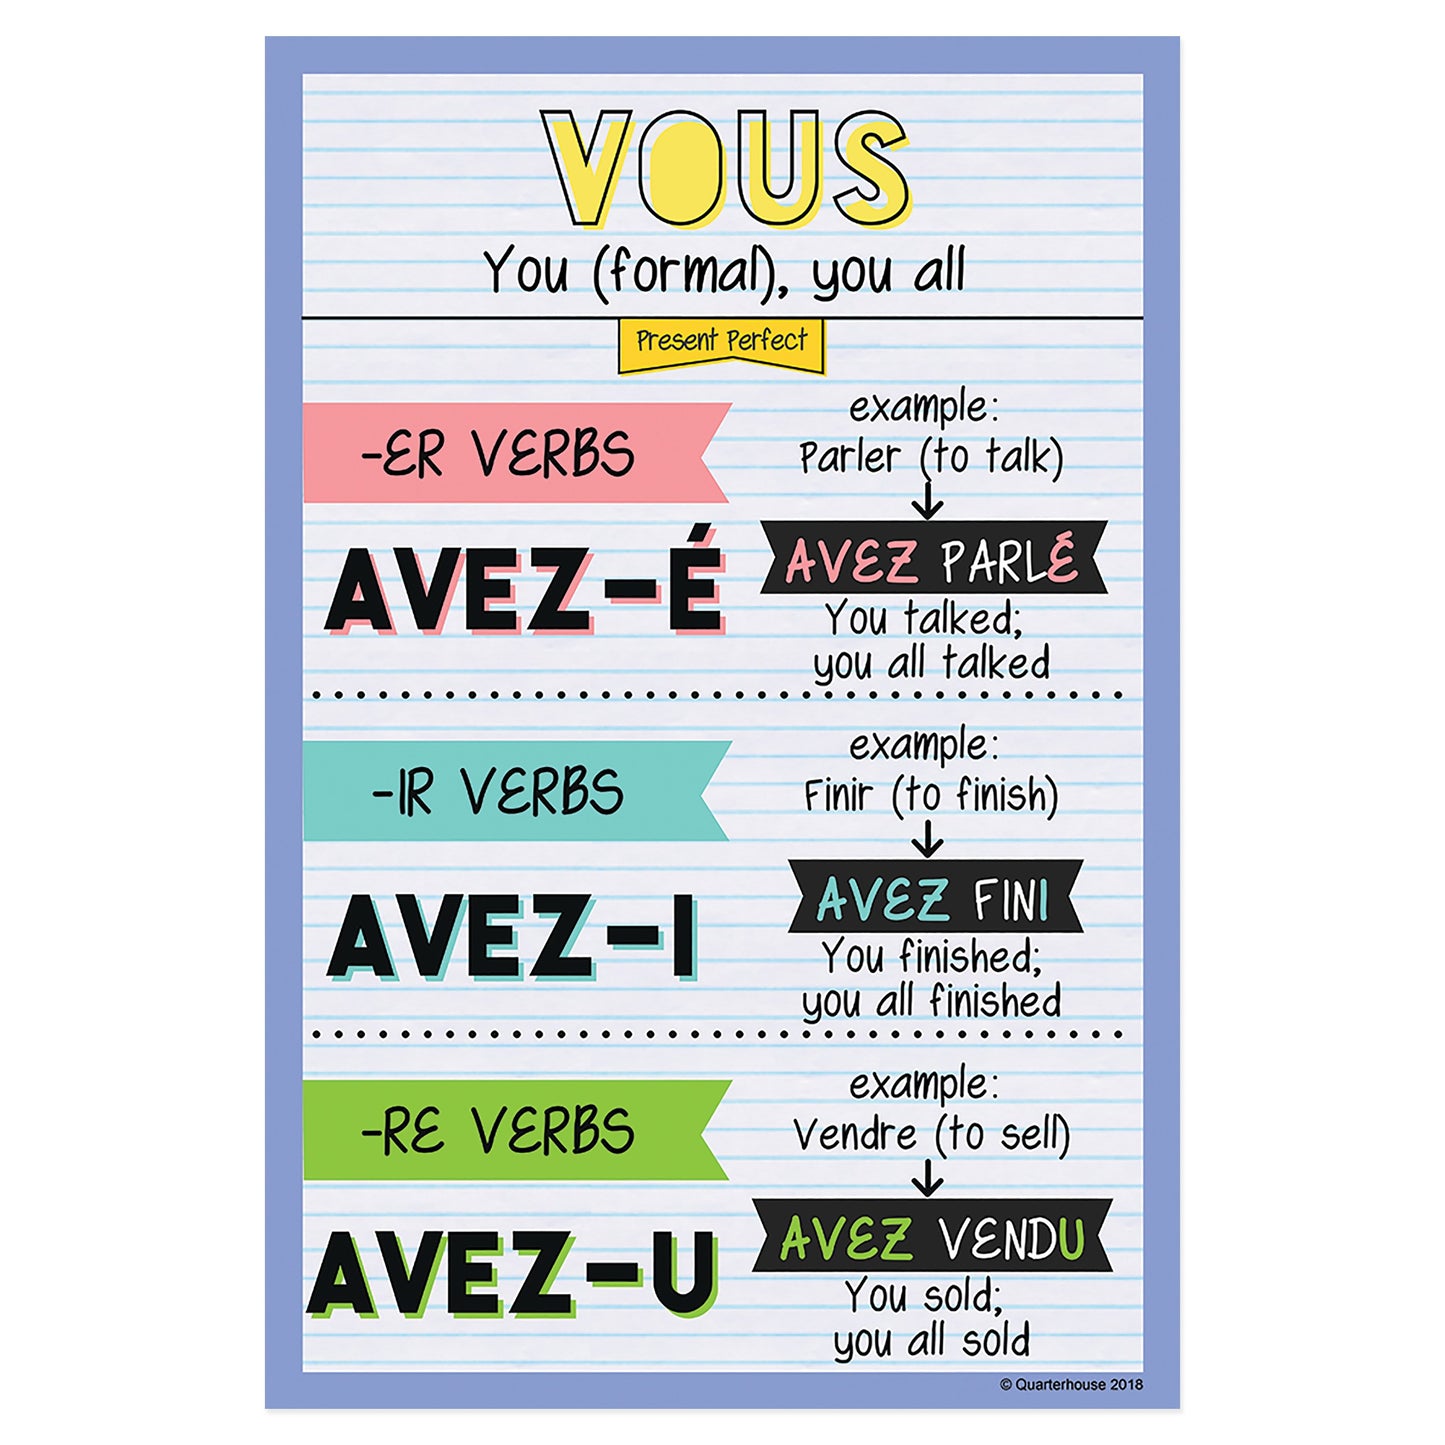 Quarterhouse Vous - Past Tense French Verb Conjugation Poster, French and ESL Classroom Materials for Teachers